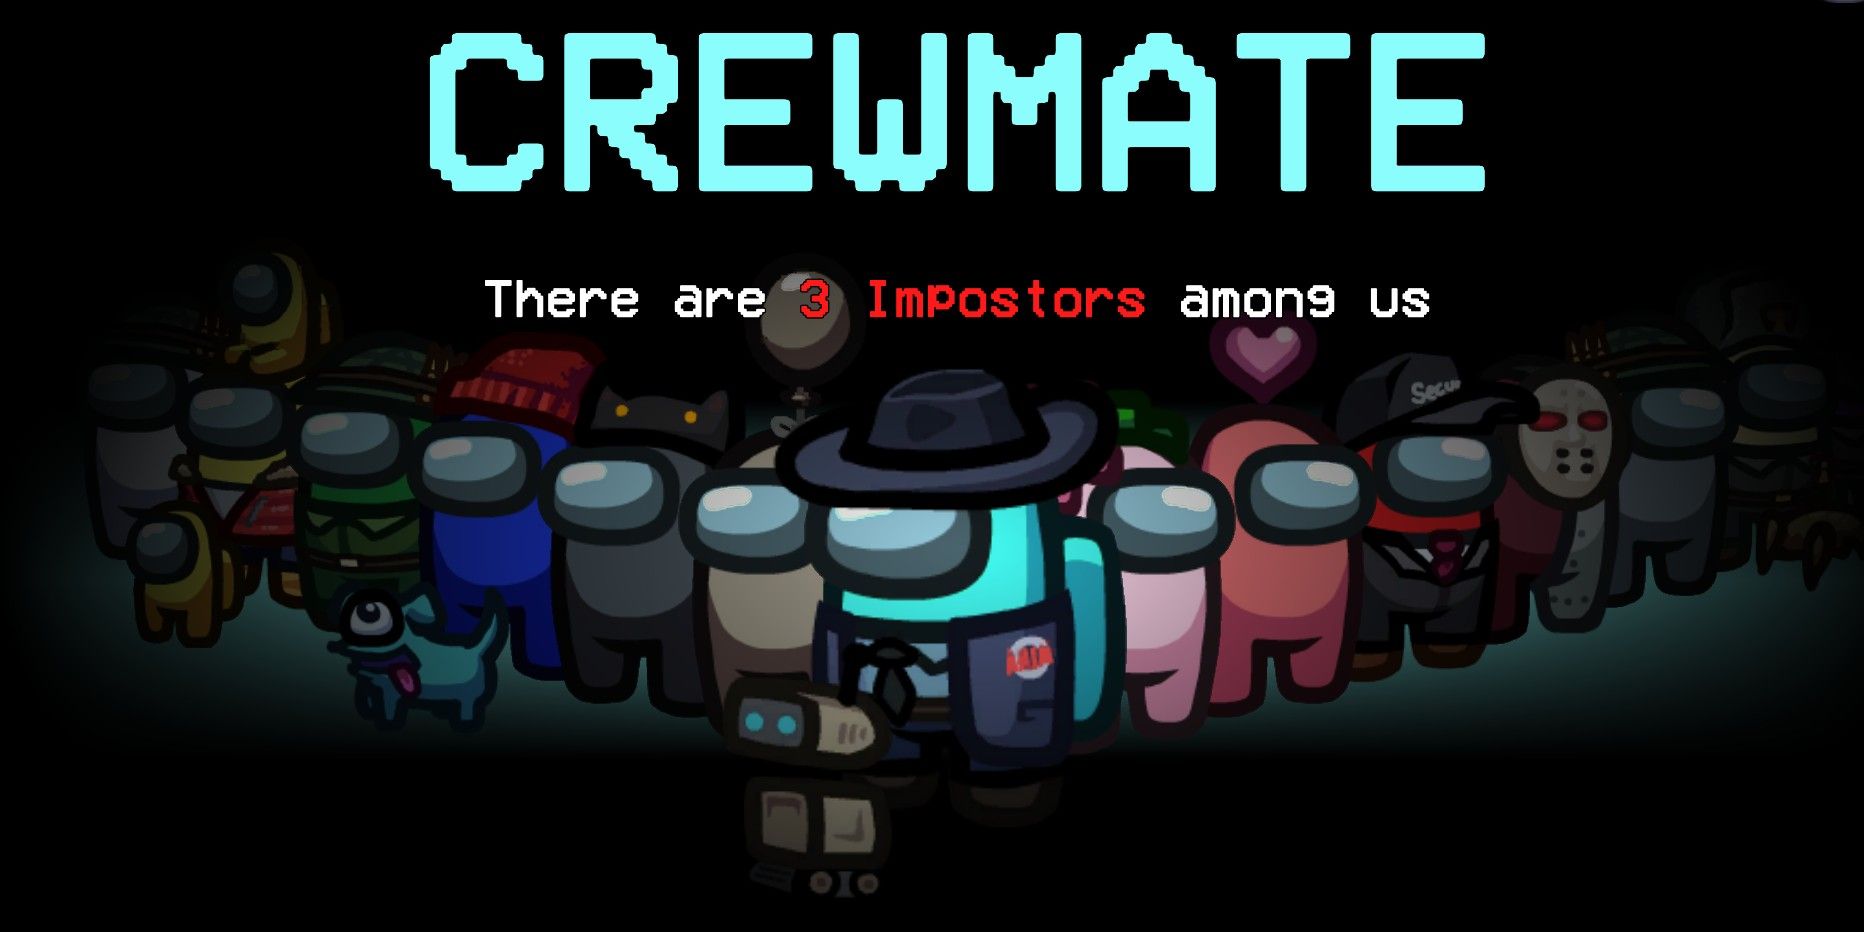 Among Us game crewmates title card and 3 impostors